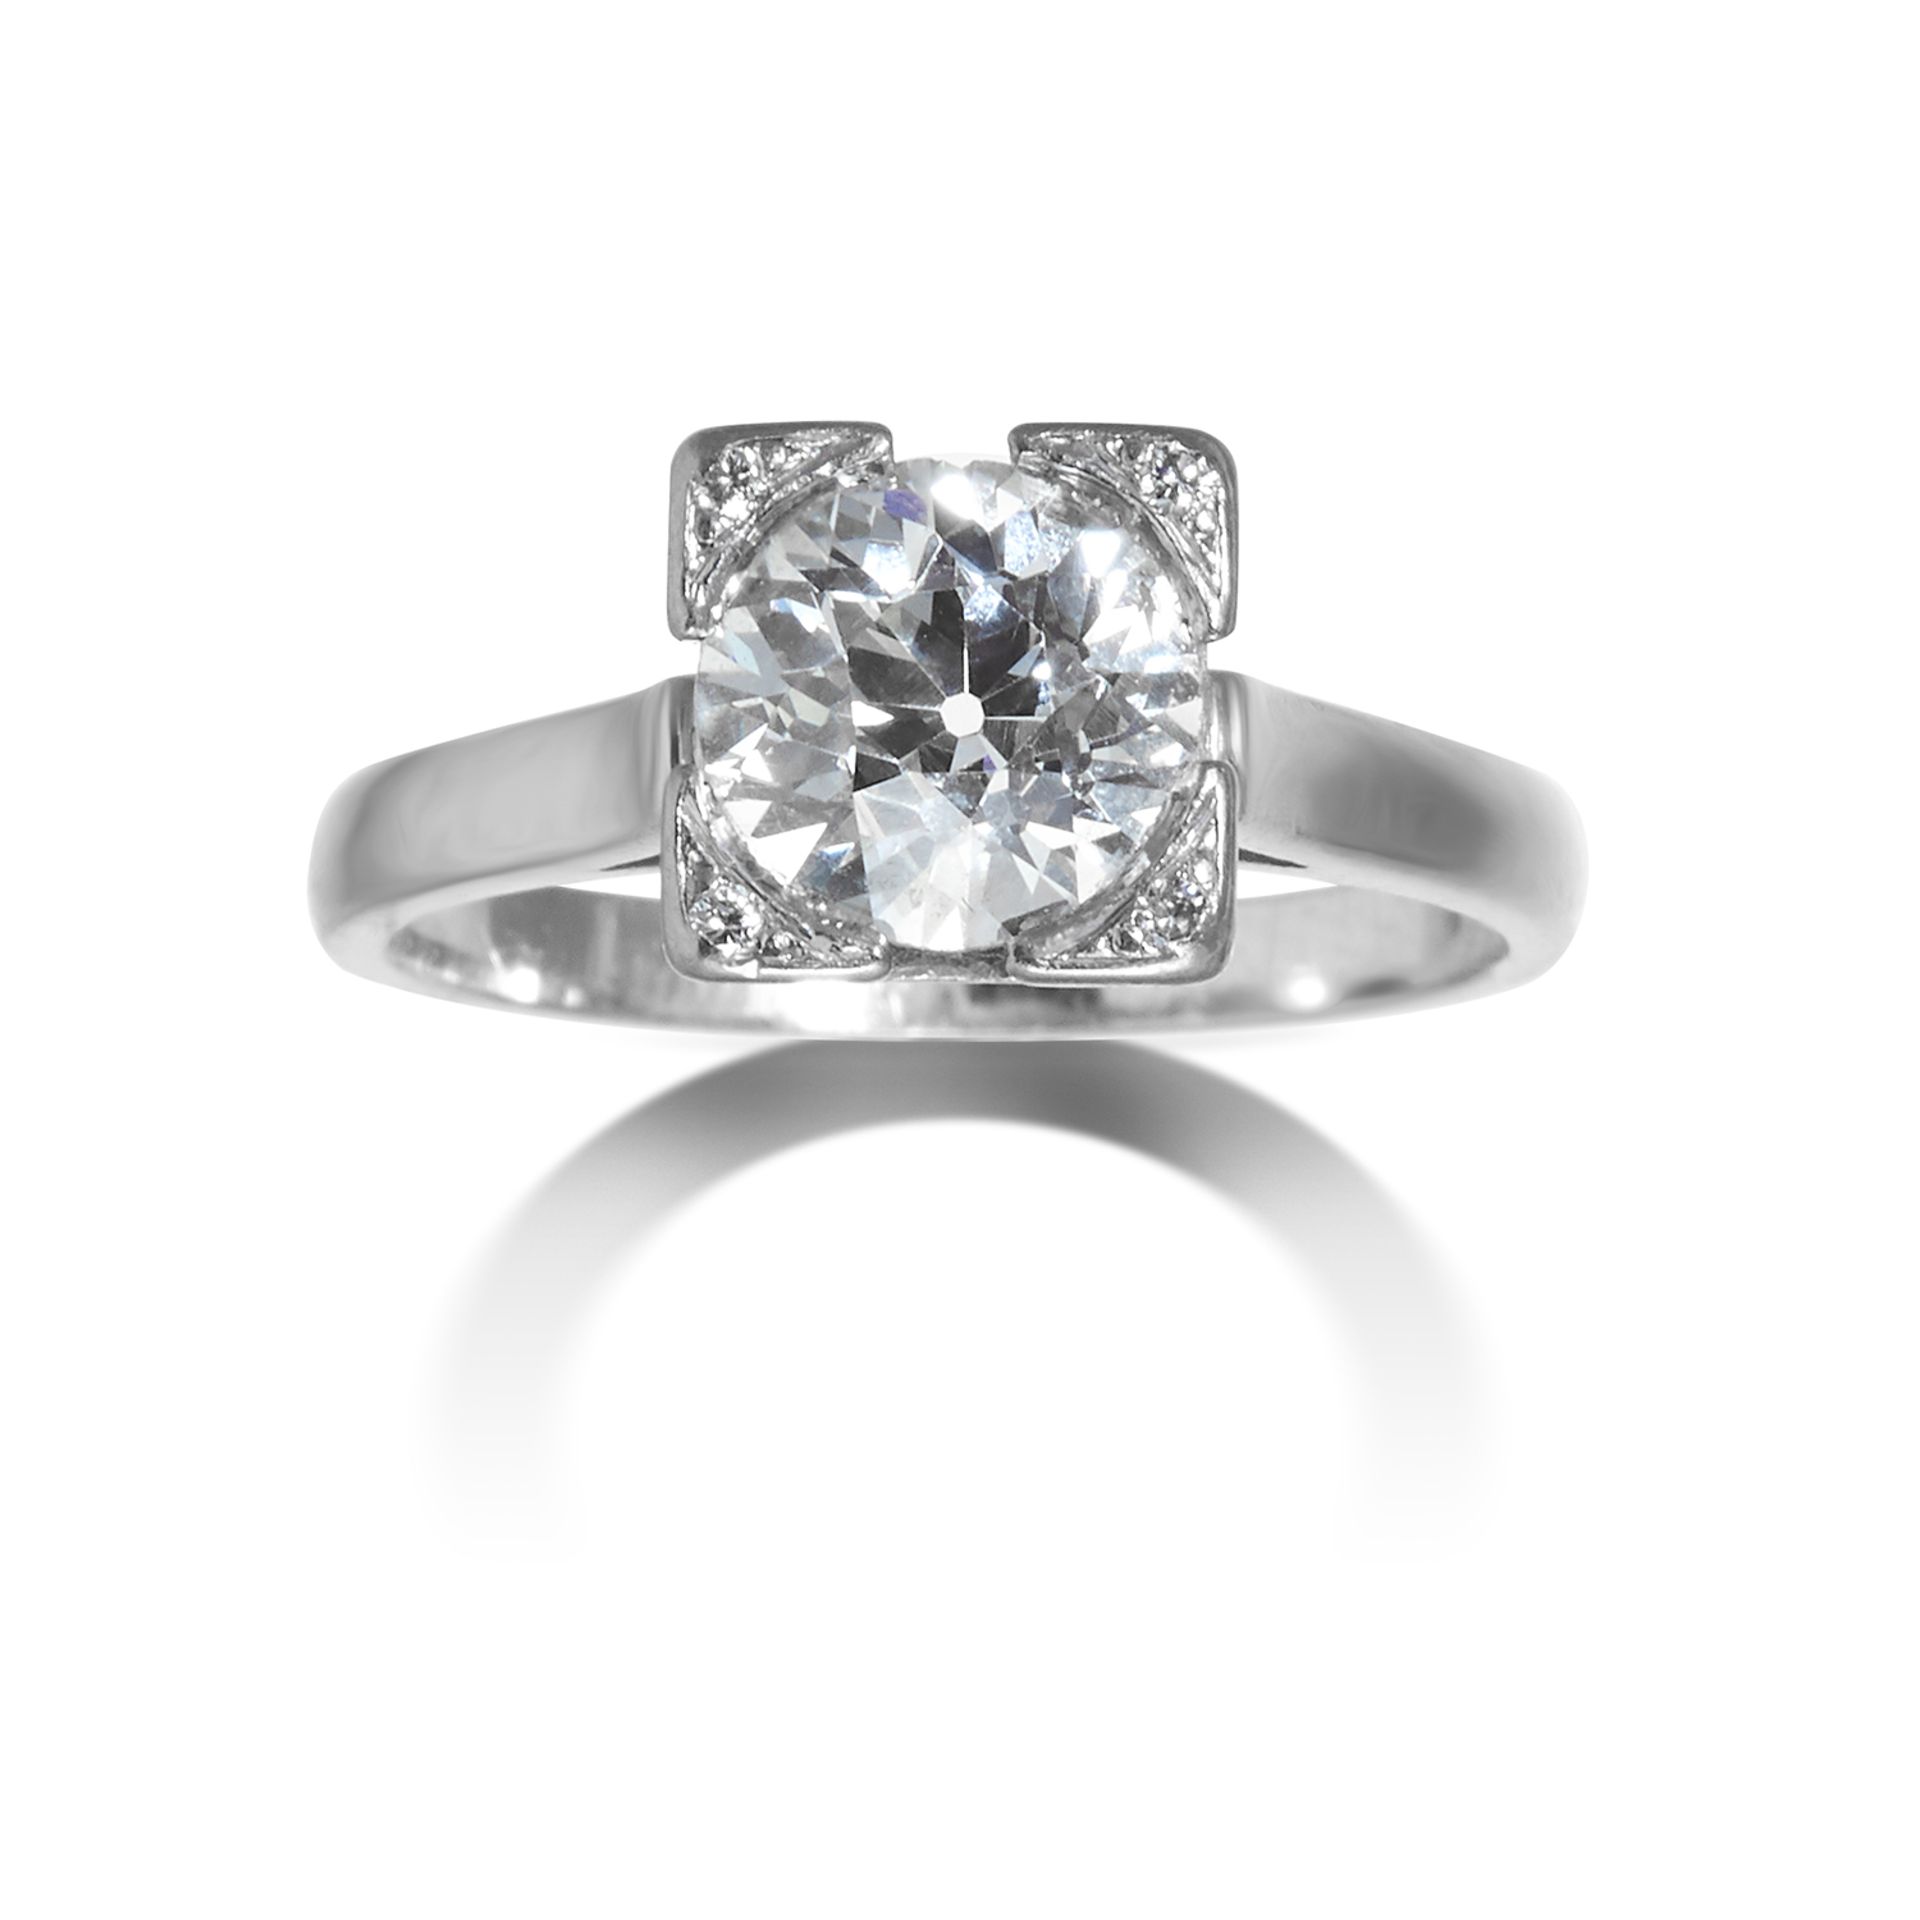 A 1.50 CARAT SOLITAIRE DIAMOND RING in platinum or white gold, set with an old cut diamond of